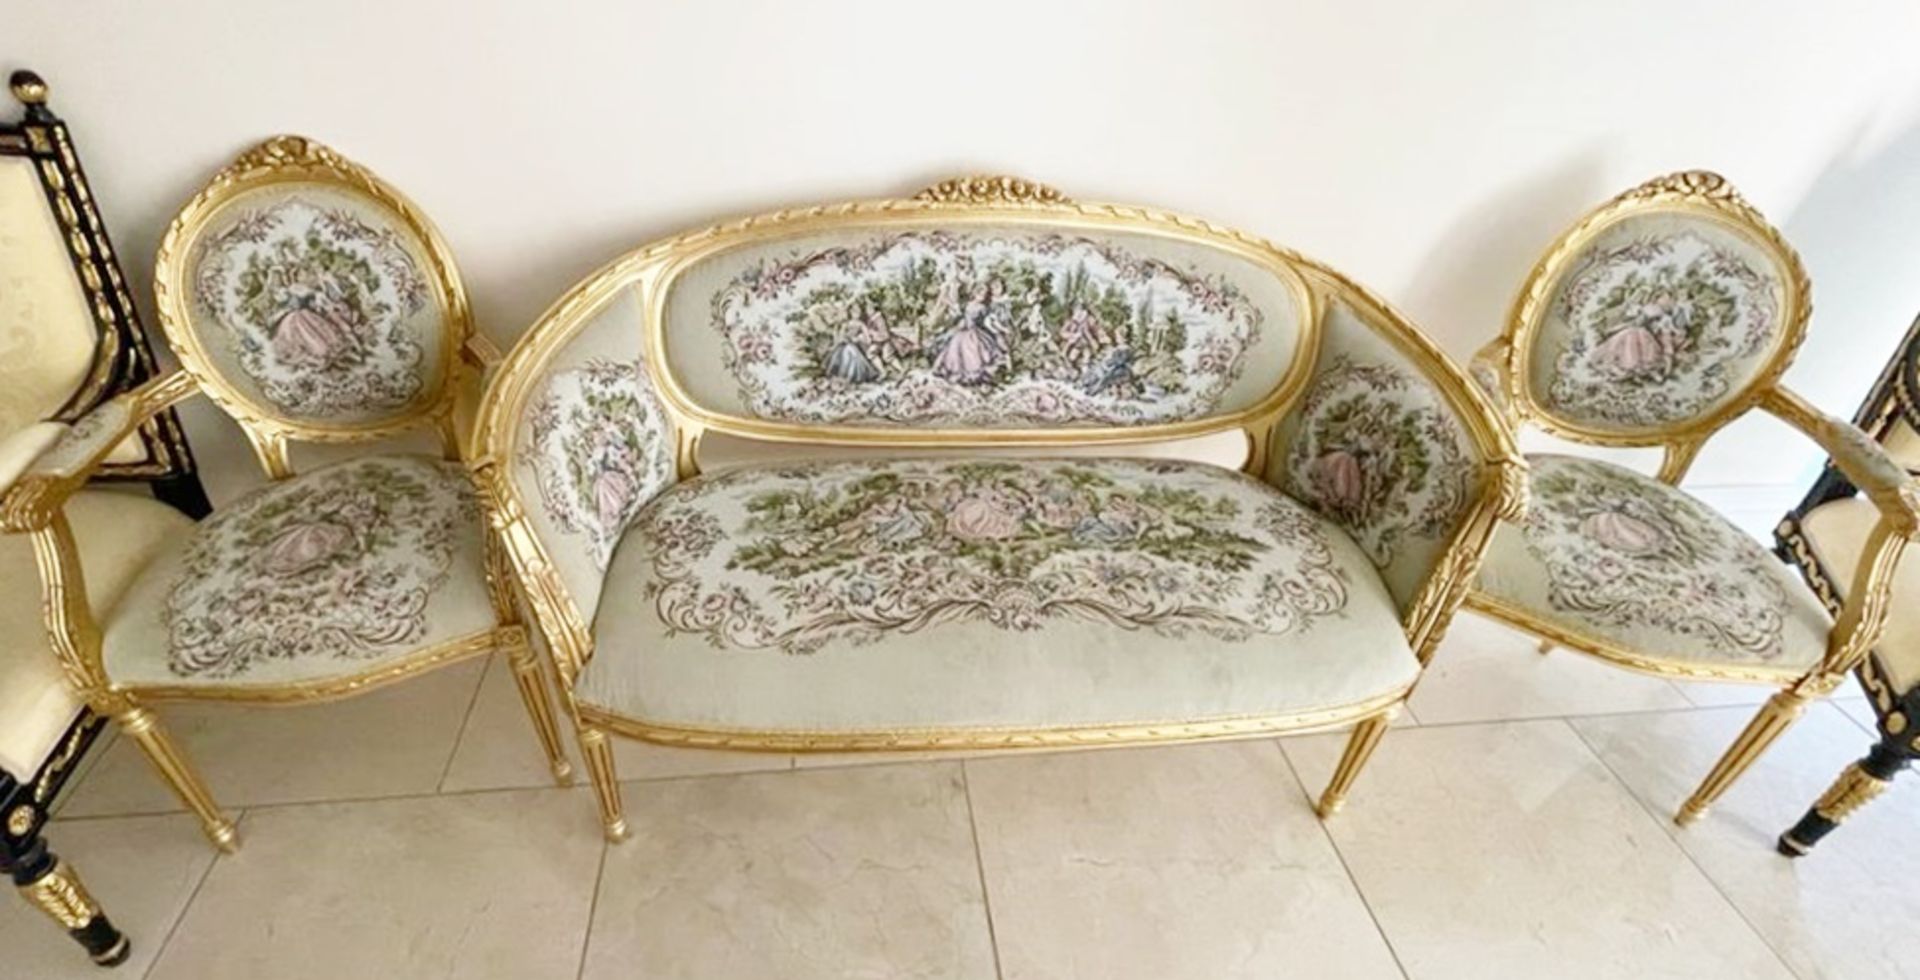 1 x Louis XVI French Style Three-Piece Salon Suite With Tapestry Upholstery and Carved Gold